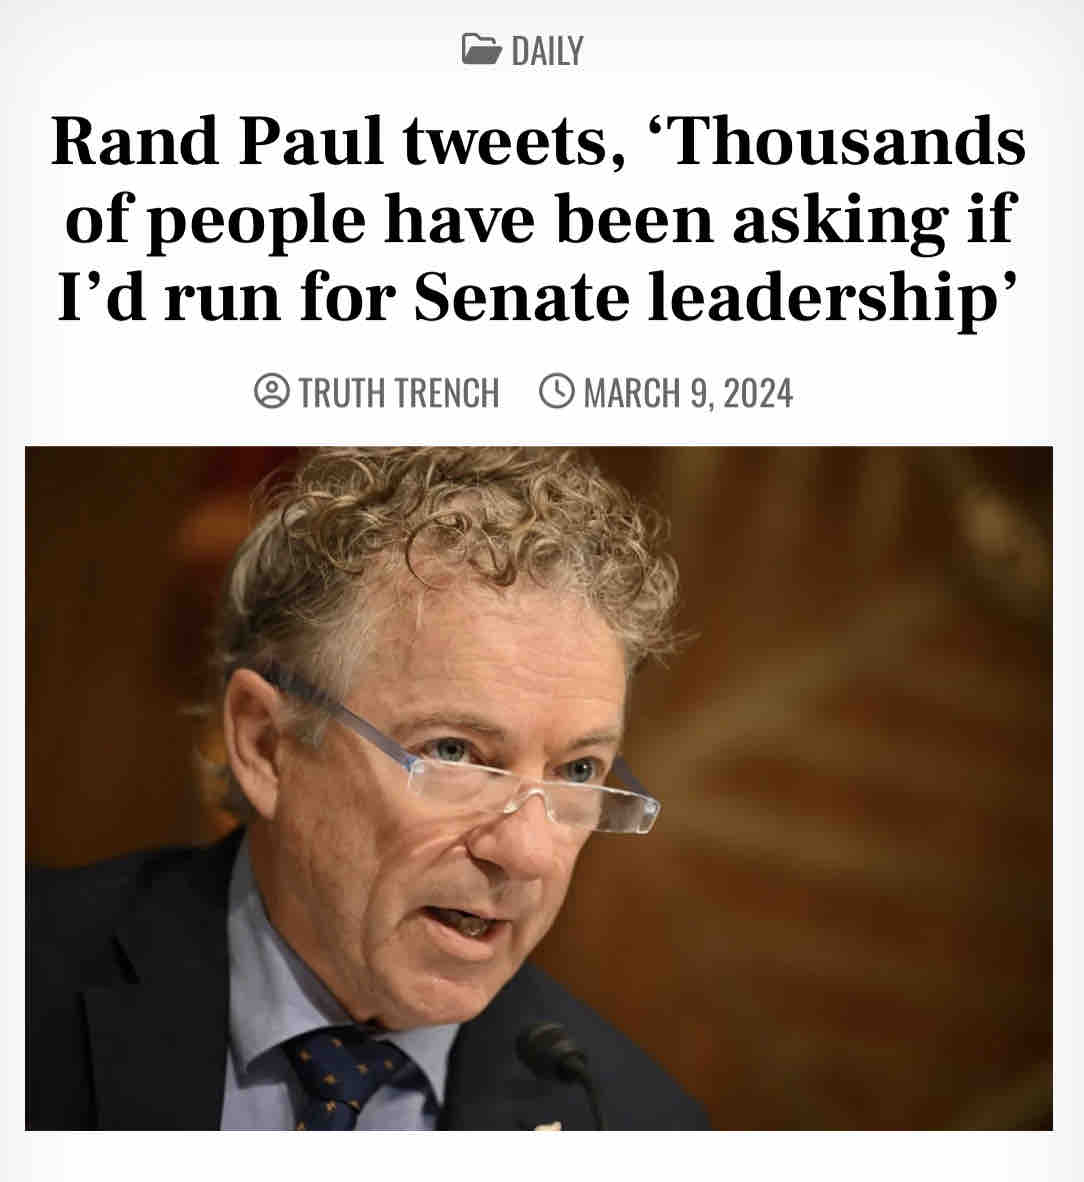 truthtrench.org/rand-paul-twee…